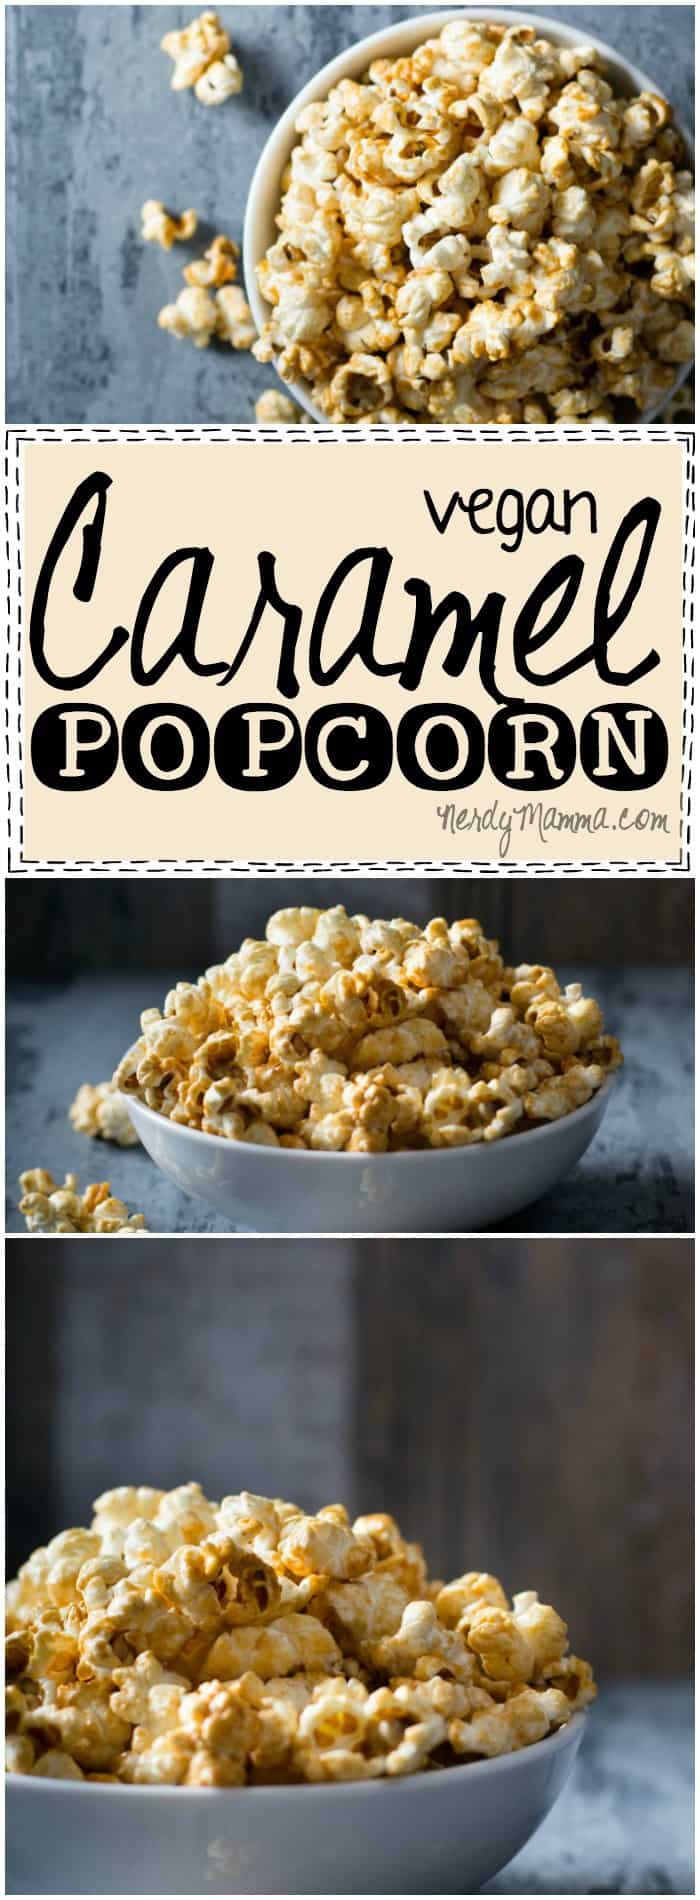 I had no idea how easy making caramel popcorn would be--and then for it to be vegan! I mean, that's AWESOME.